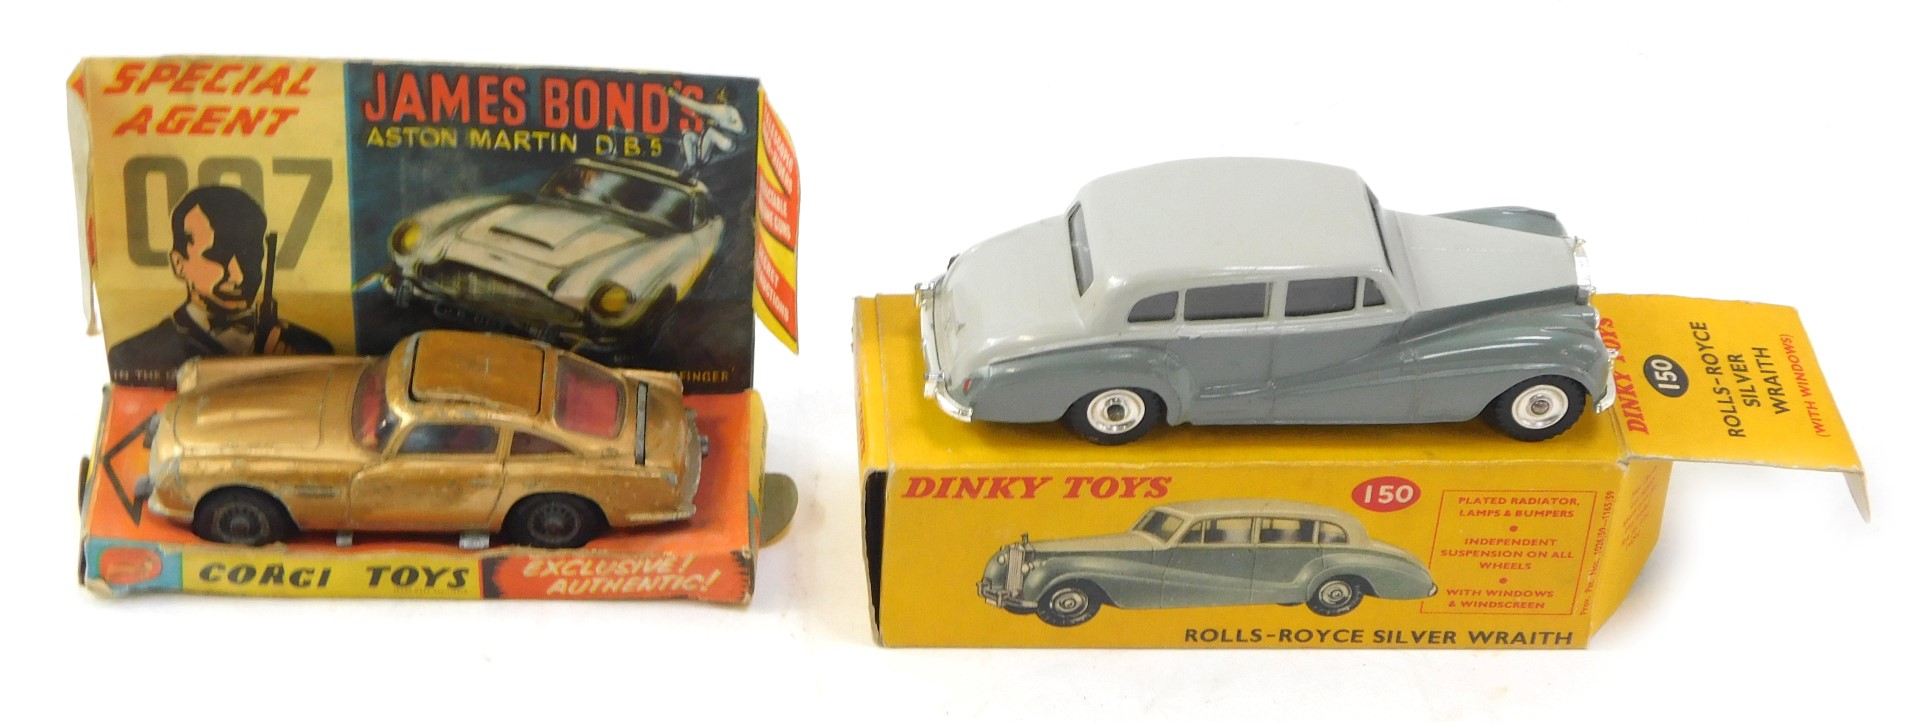 Dinky Toys cars, Dinky and Corgi Toys cars, comprising Dinky 150 Rolls Royce Silver Wraith, and Corg